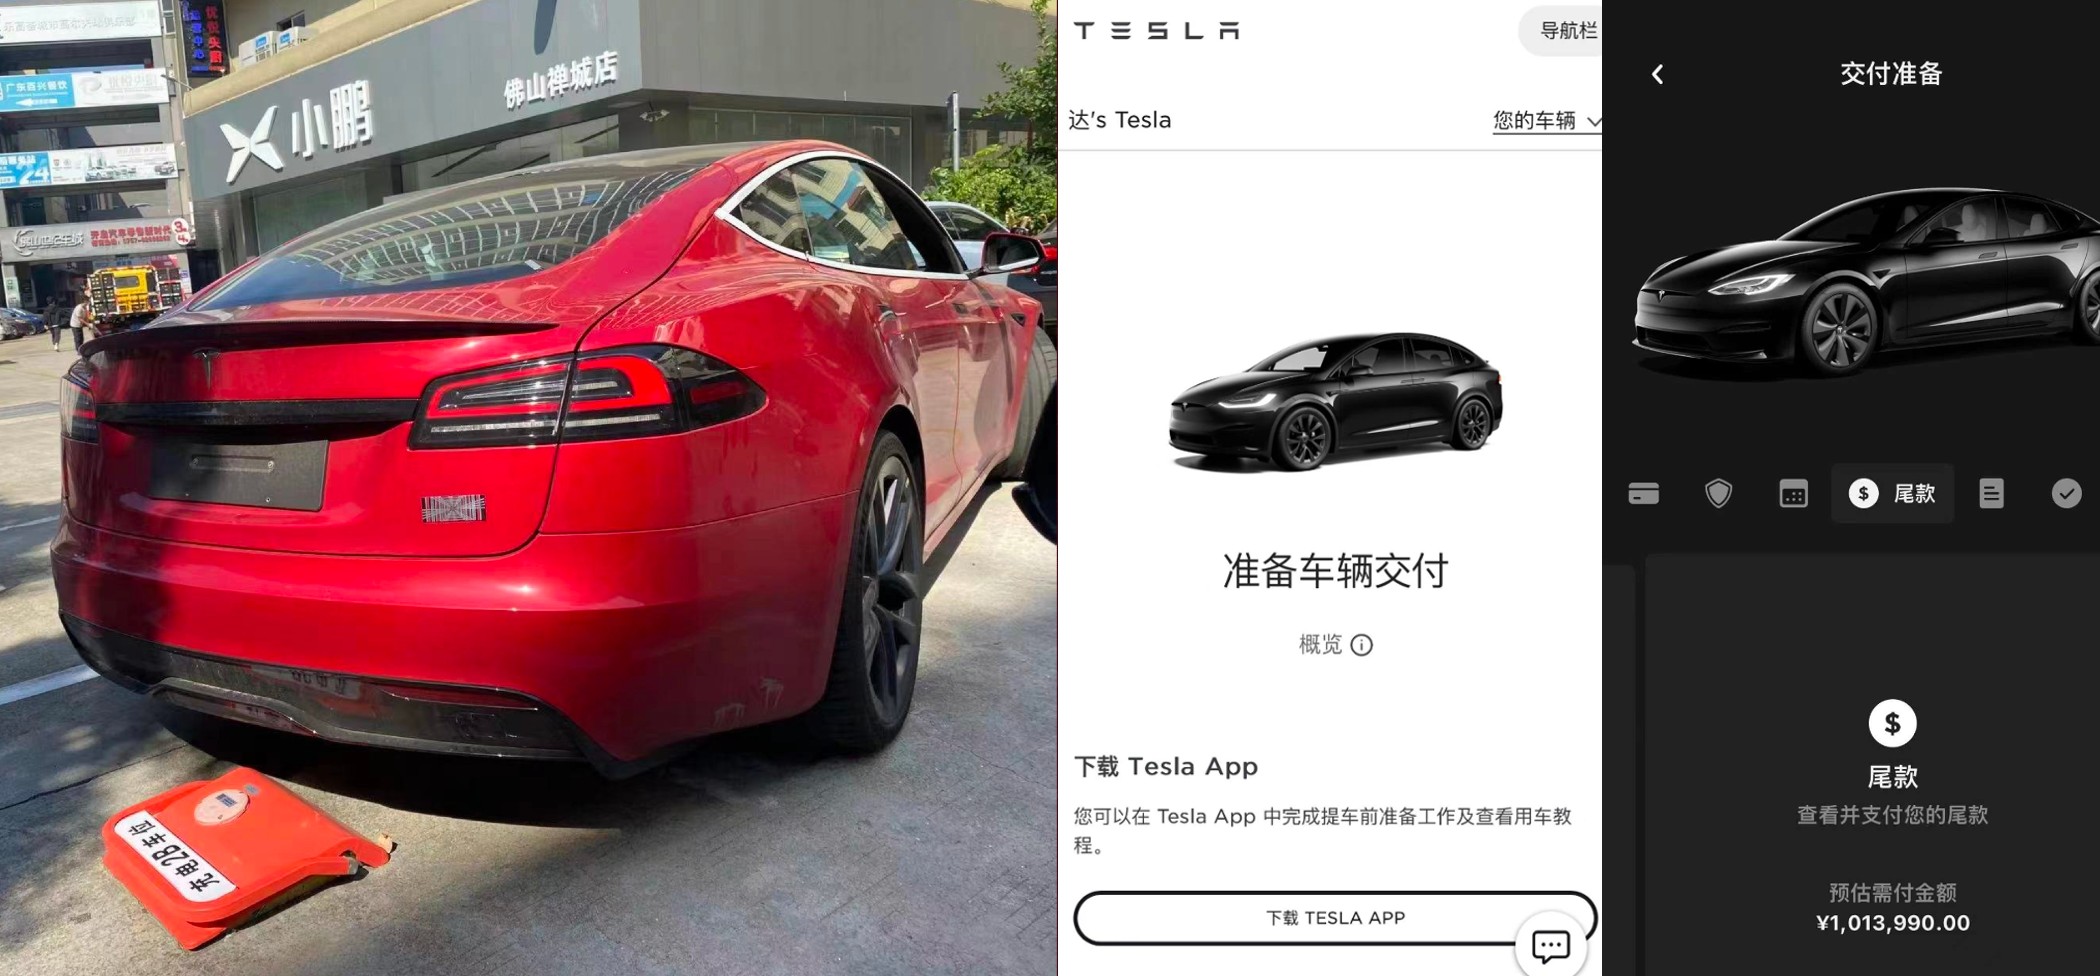 Tesla Model S Plaid delivery in China